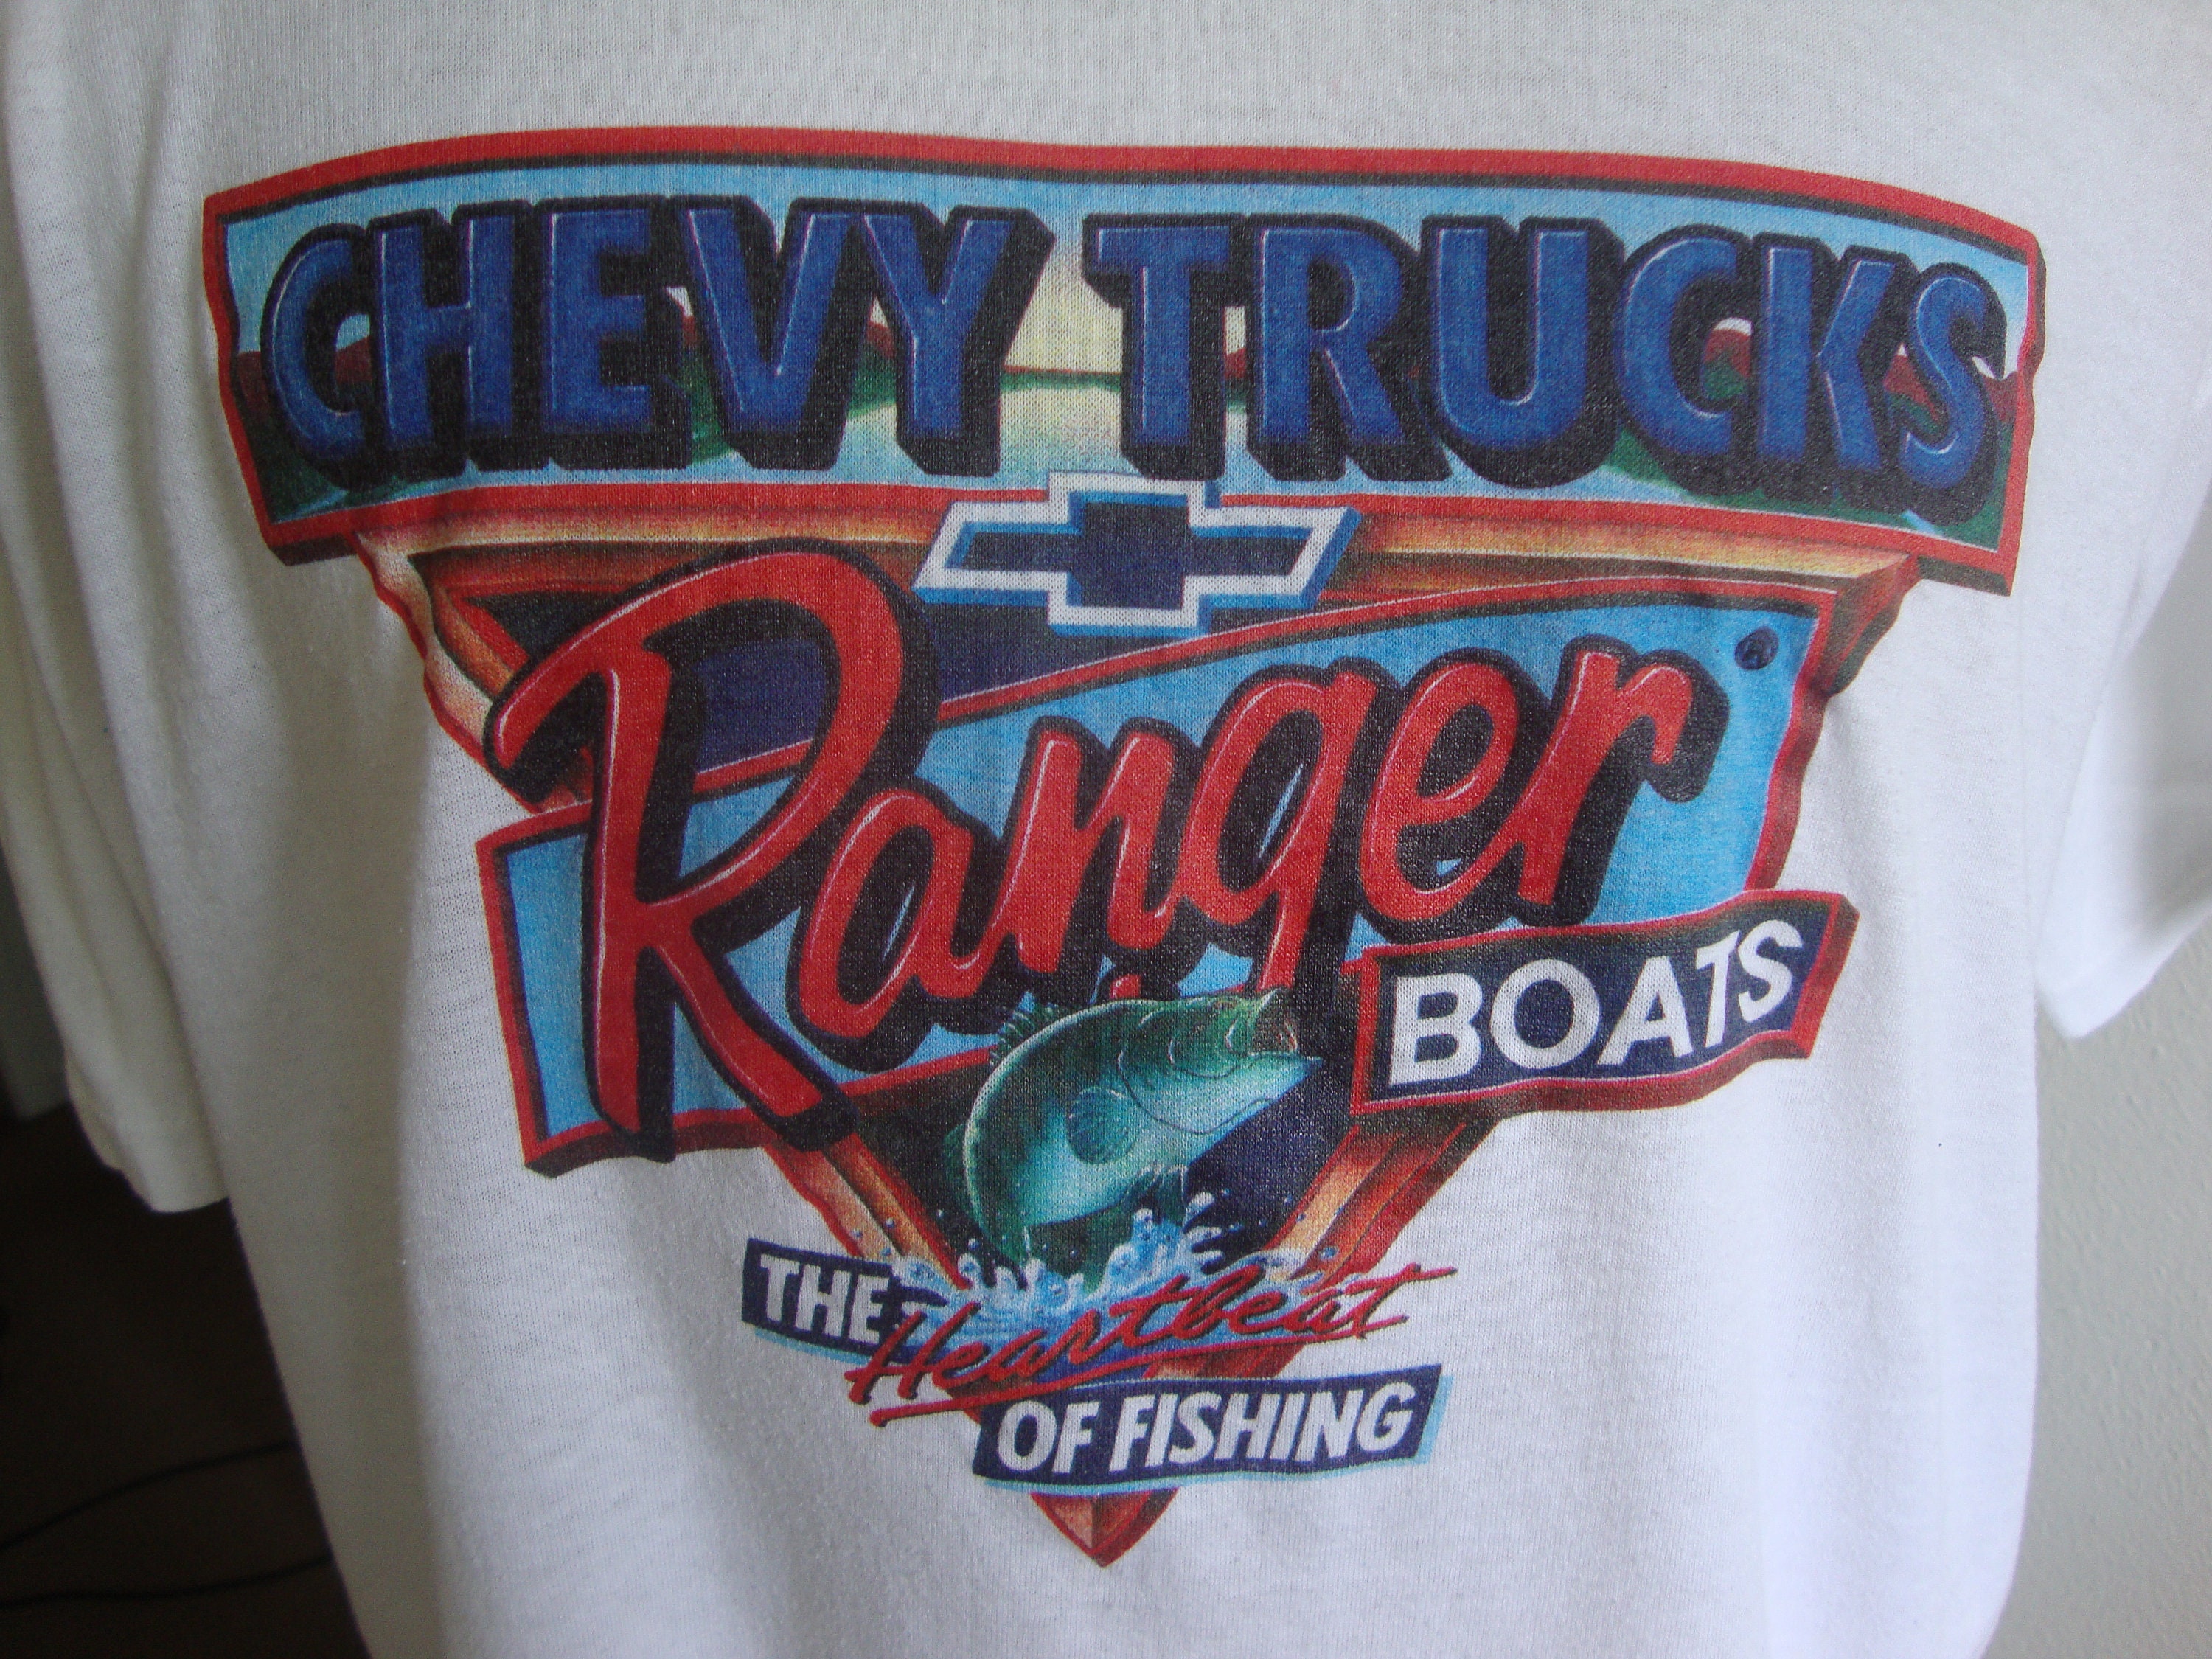 Vintage 90's Chevy Trucks Ranger Boats the Heartbeat of Fishing T Shirt  Size L 